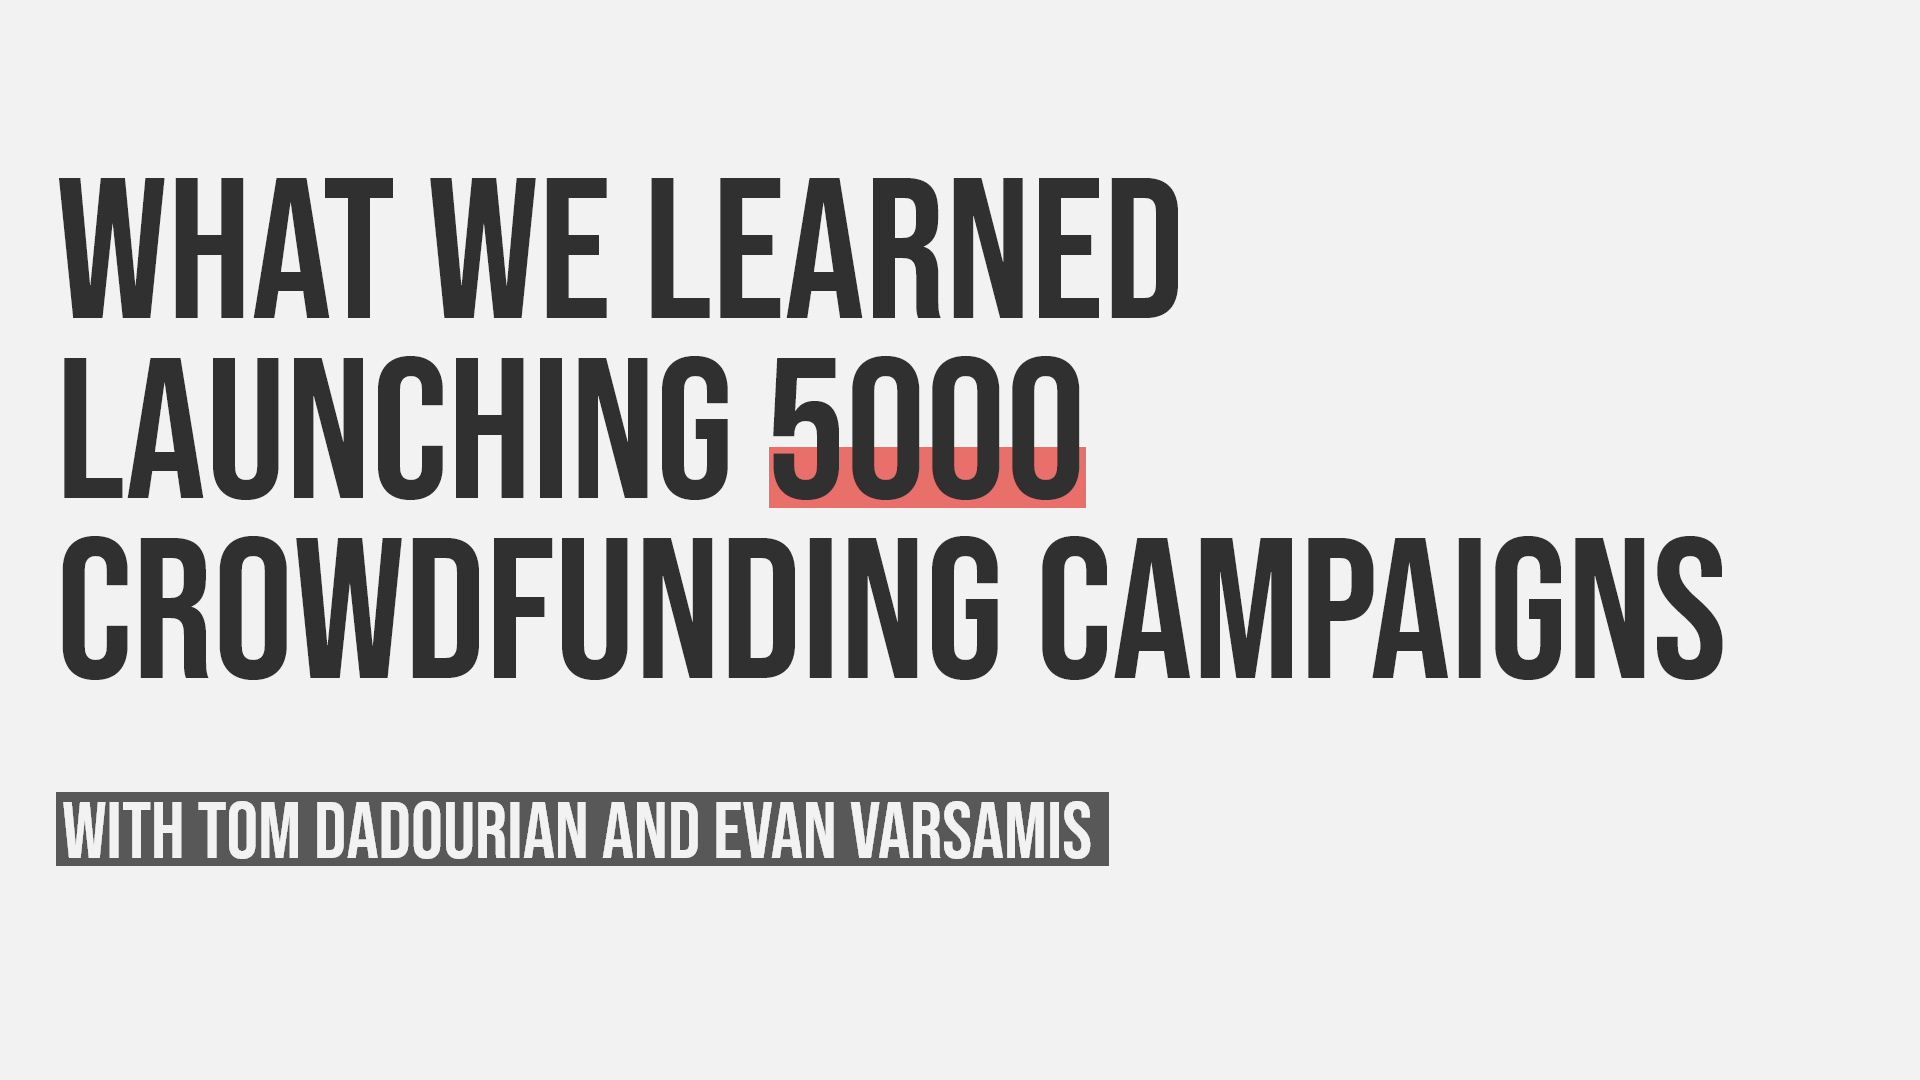 Things we’ve learned working on 5,000 crowdfunding campaigns